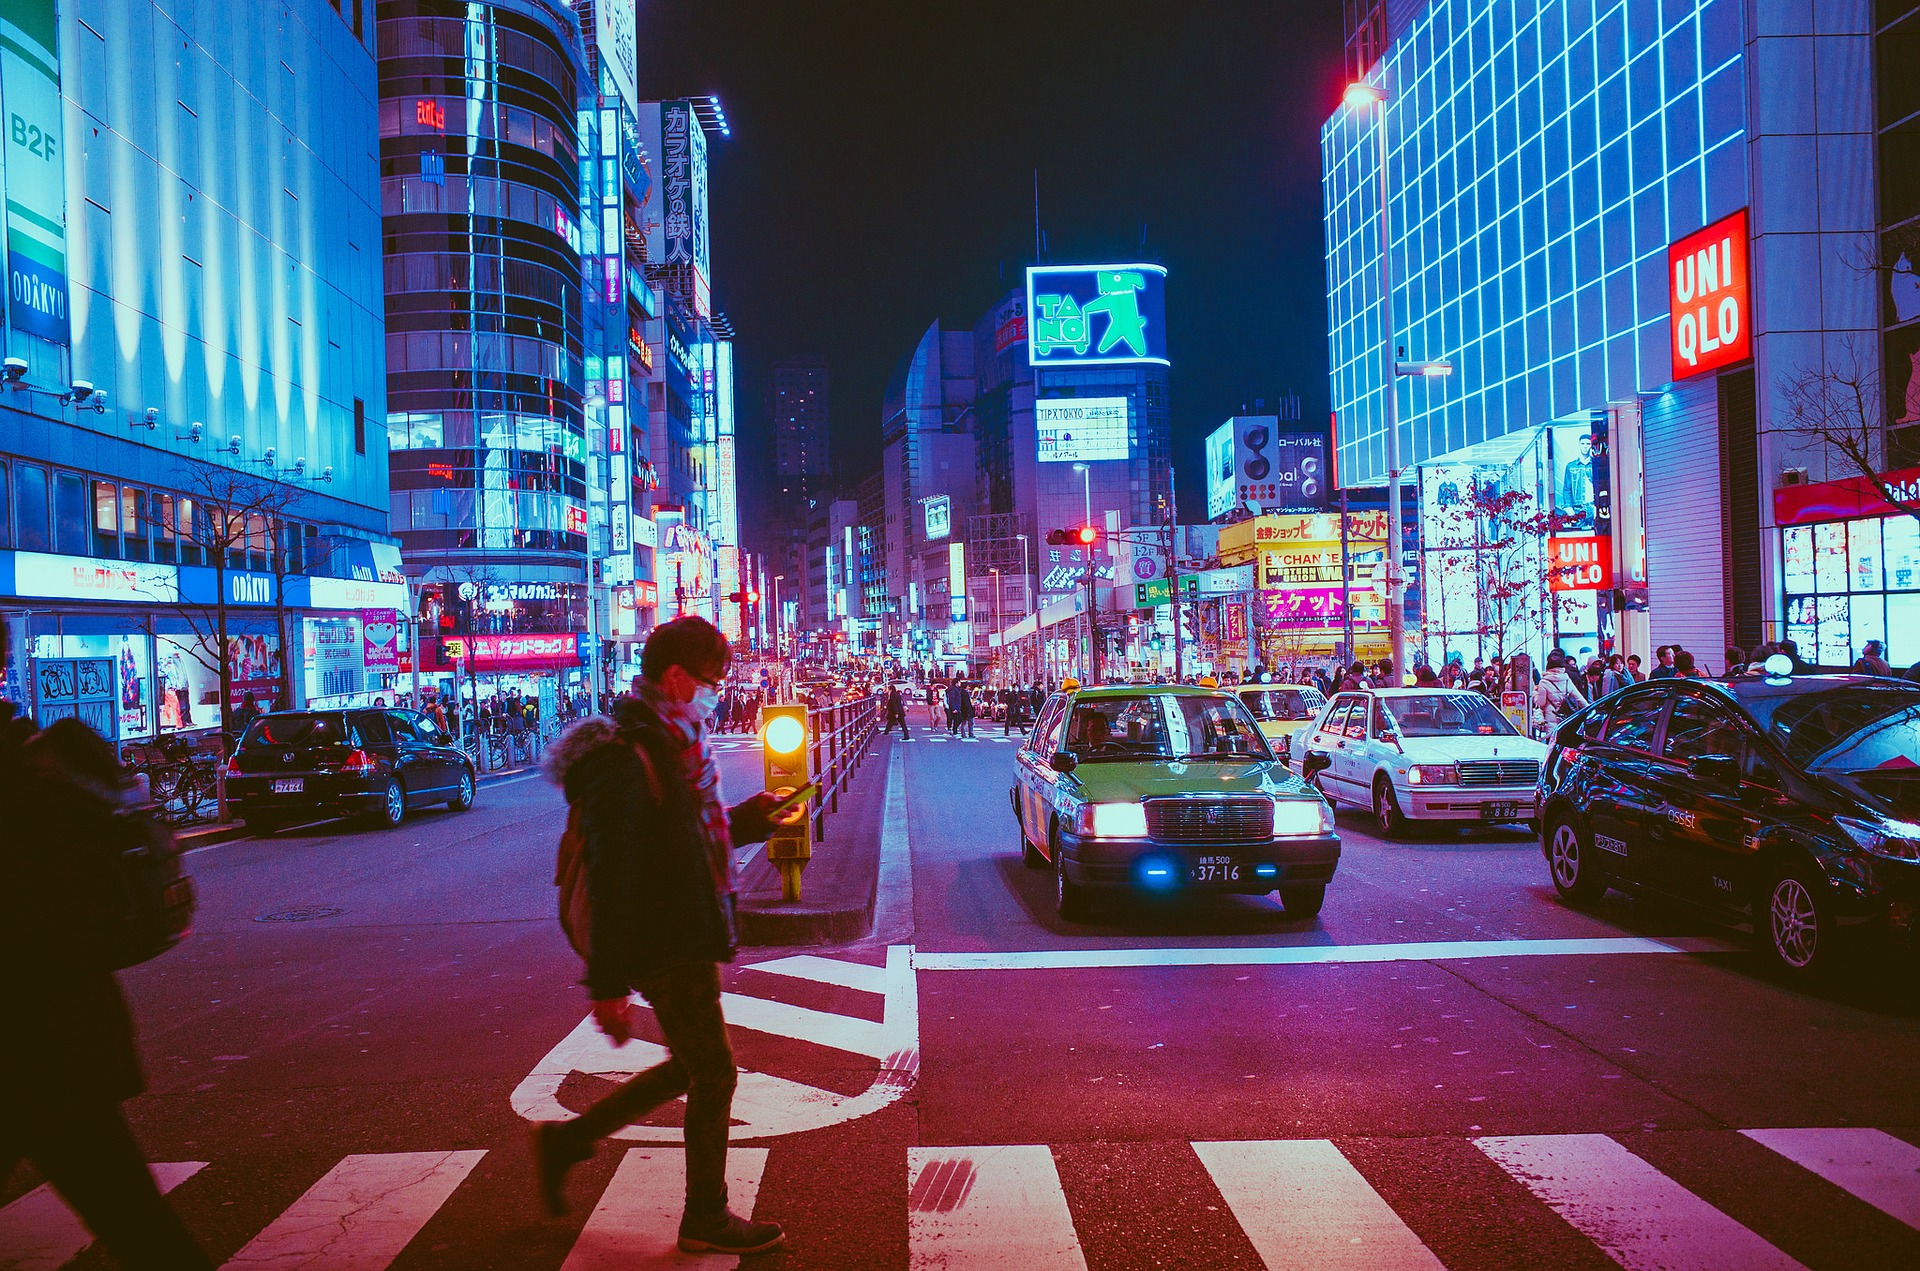 Night photo of a busy street in Japan